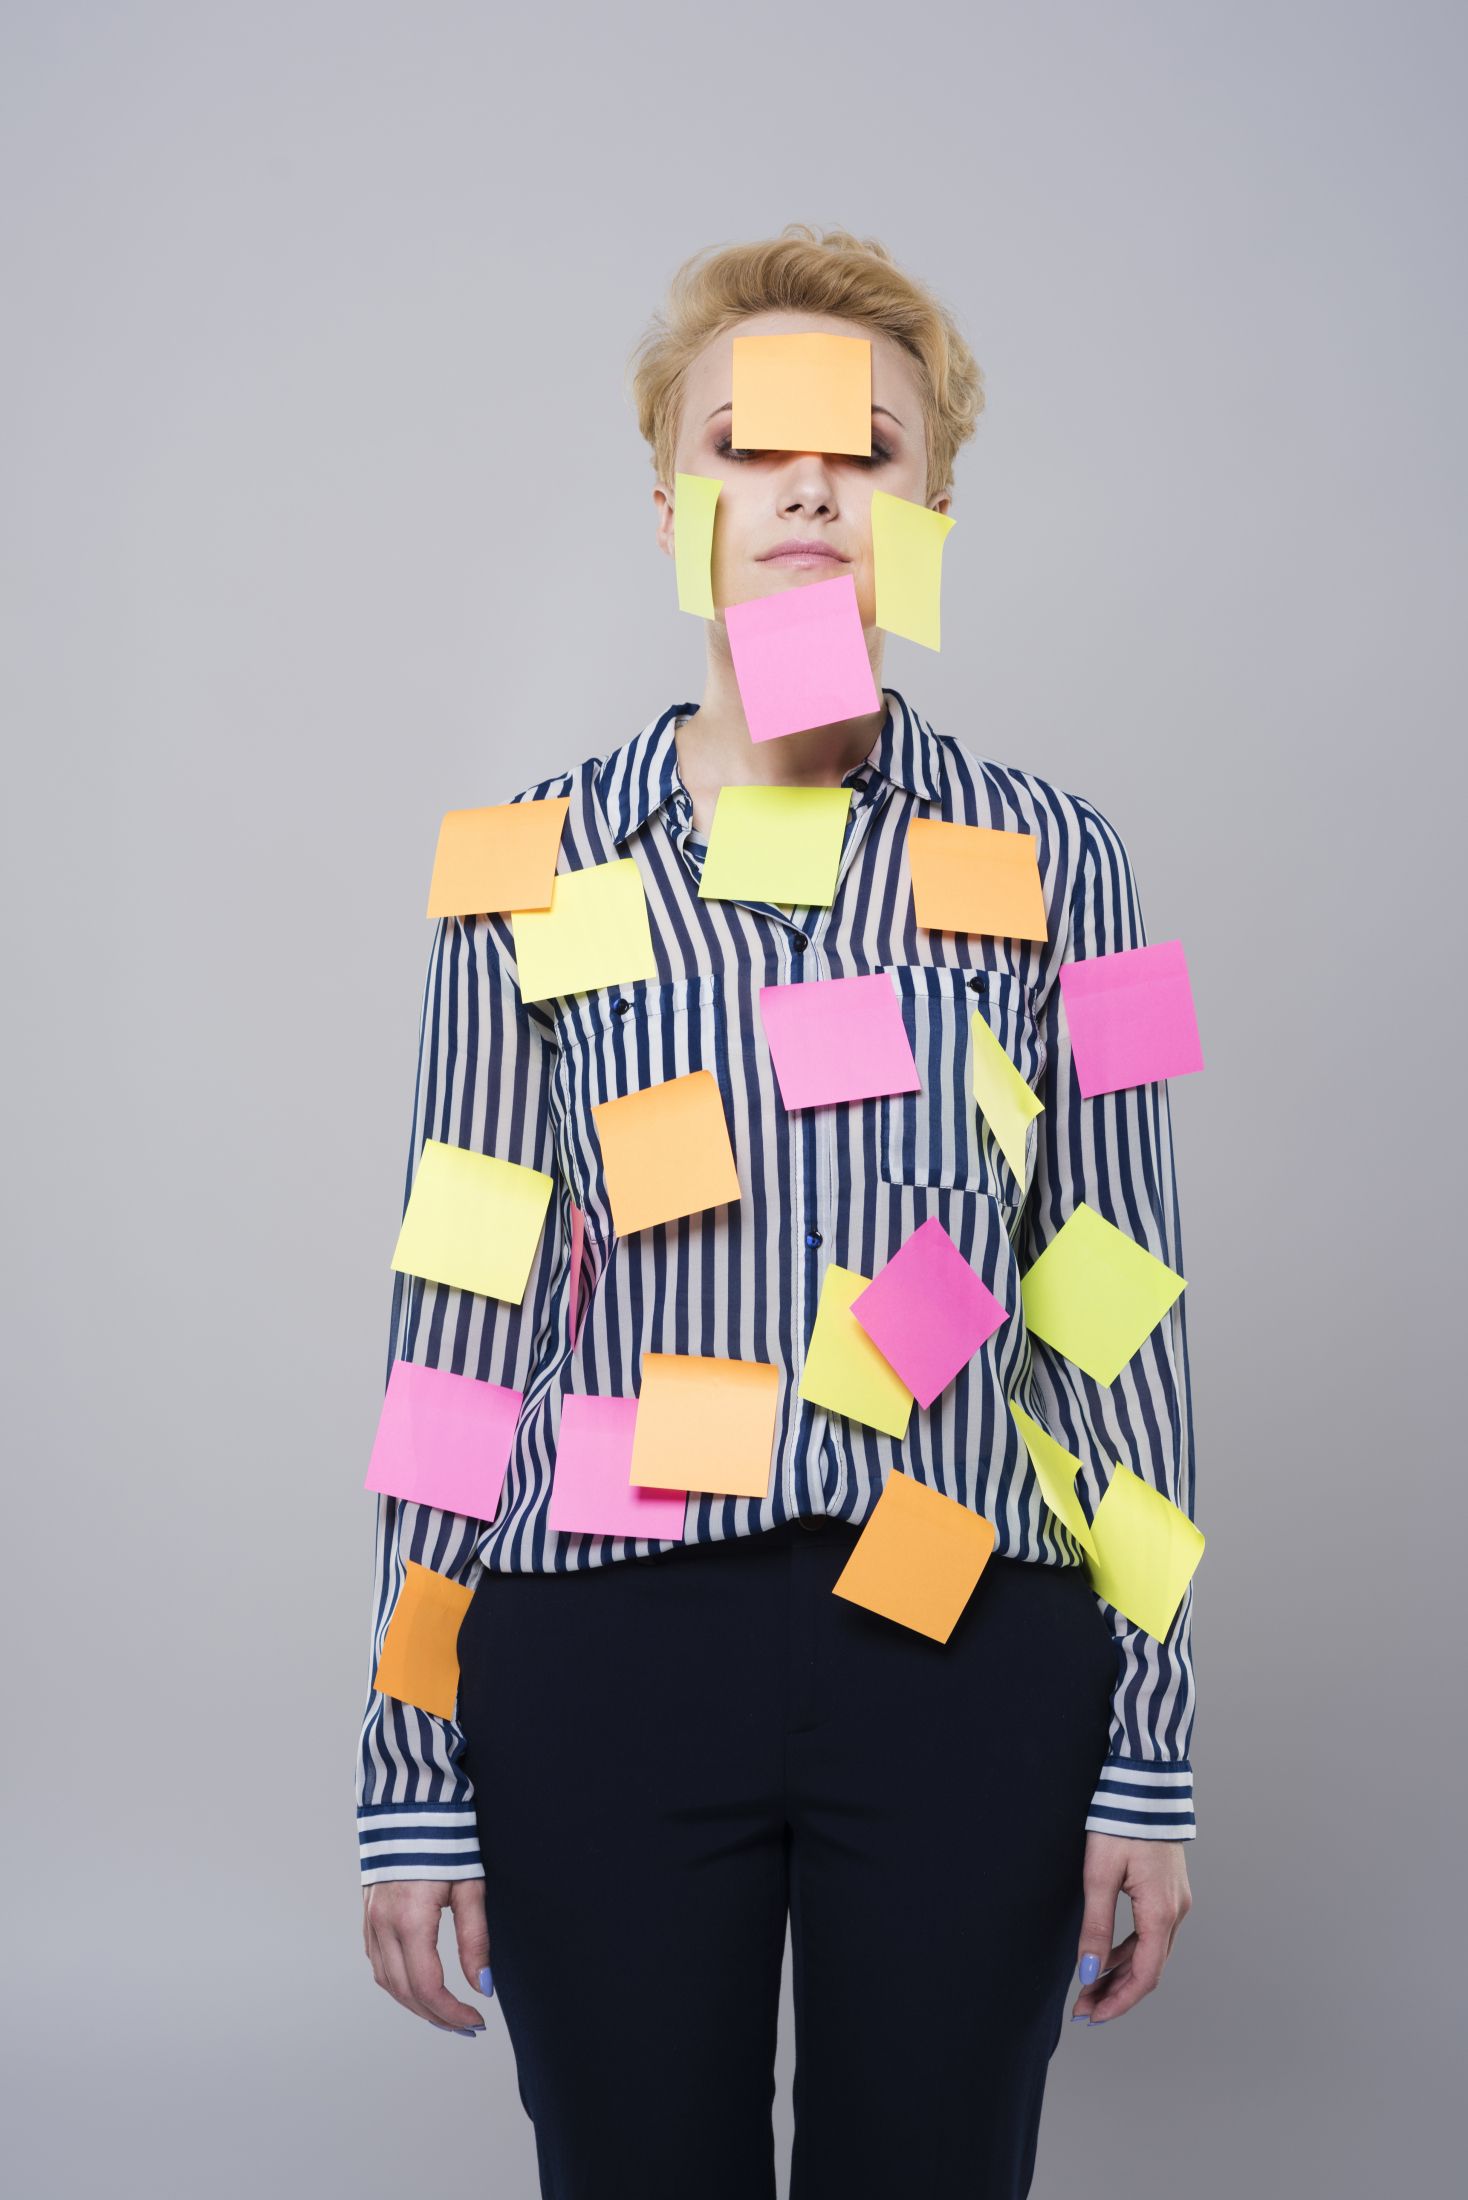 multi-tasking-woman-with-colorful-papers.jpg